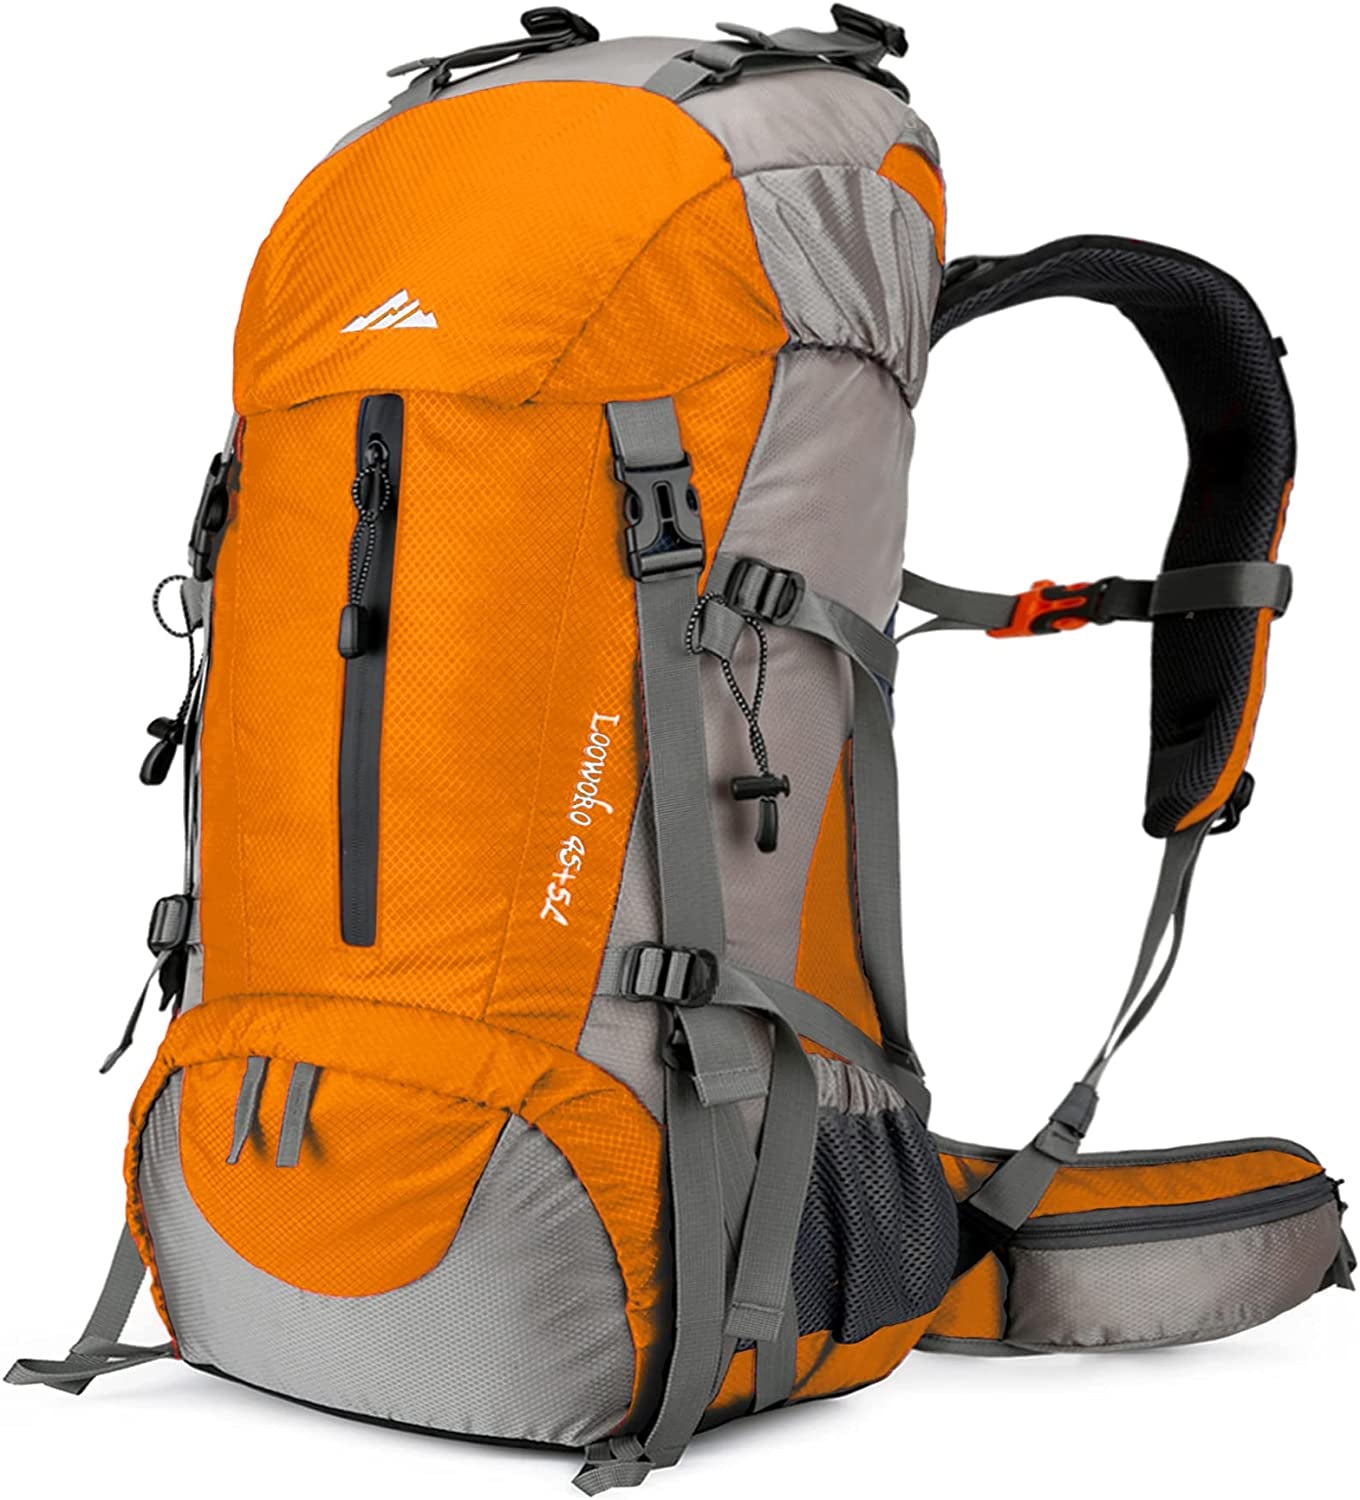 "Premium All-Weather Hiking Backpack - Loowoko 50L: Stay Dry and Equipped with the Waterproof Camping Essentials Bag, Complete with Rain Cover. Enjoy Unparalleled Comfort and Convenience with this Lightweight 45+5 Liter Backpacking Backpack!"